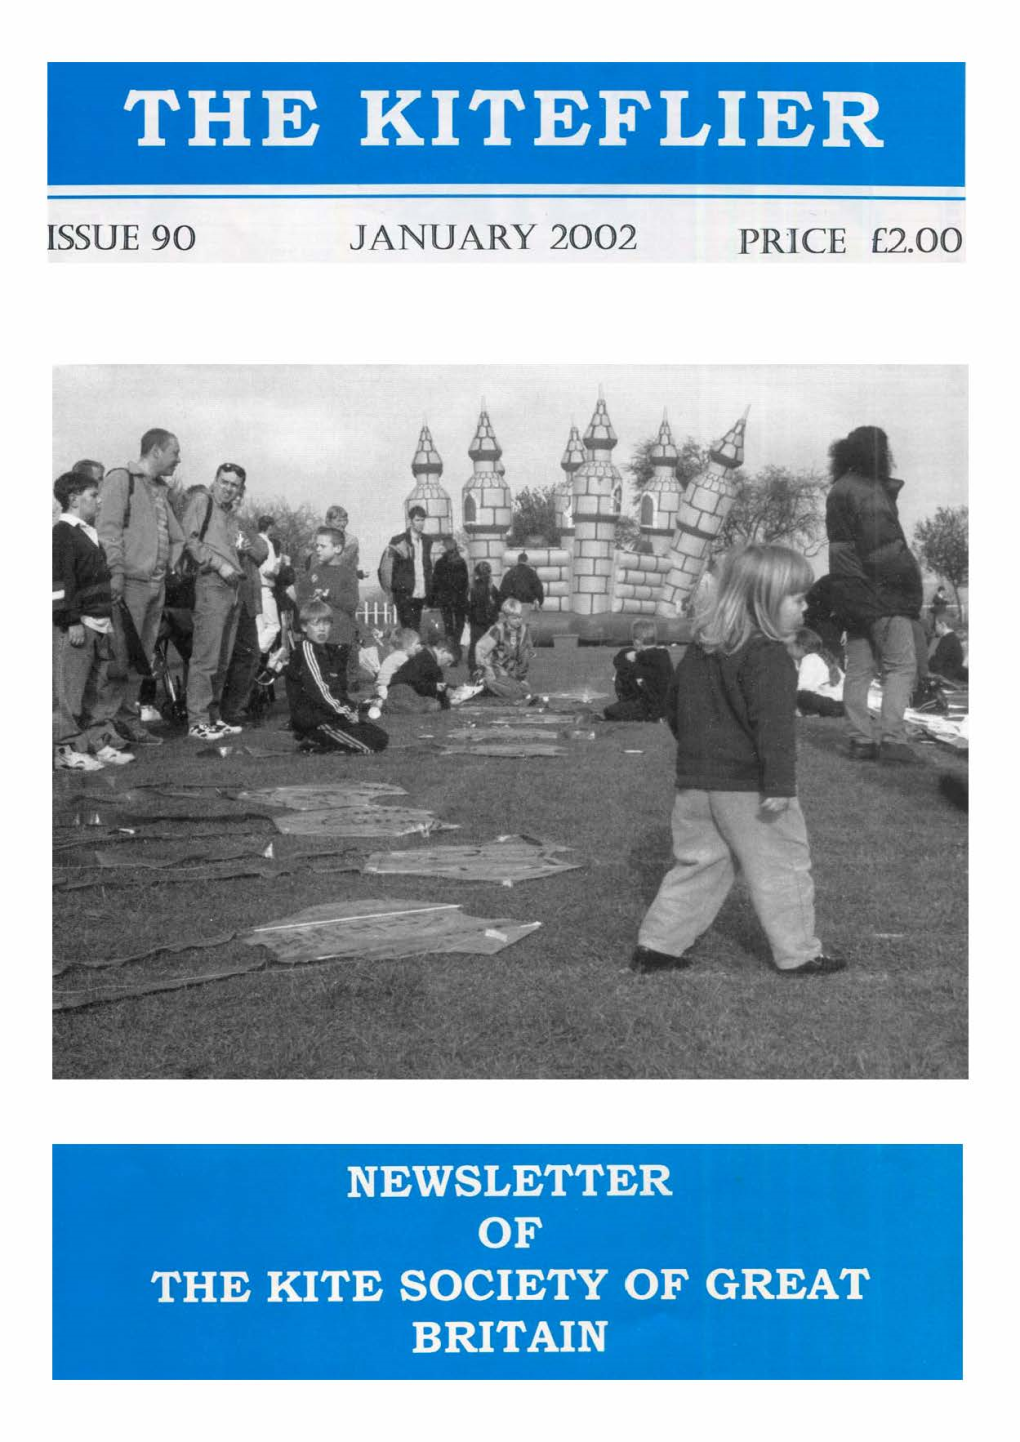 THE KITEFLIER Lssue 90 JANUARY 2002 PRICE £2.00